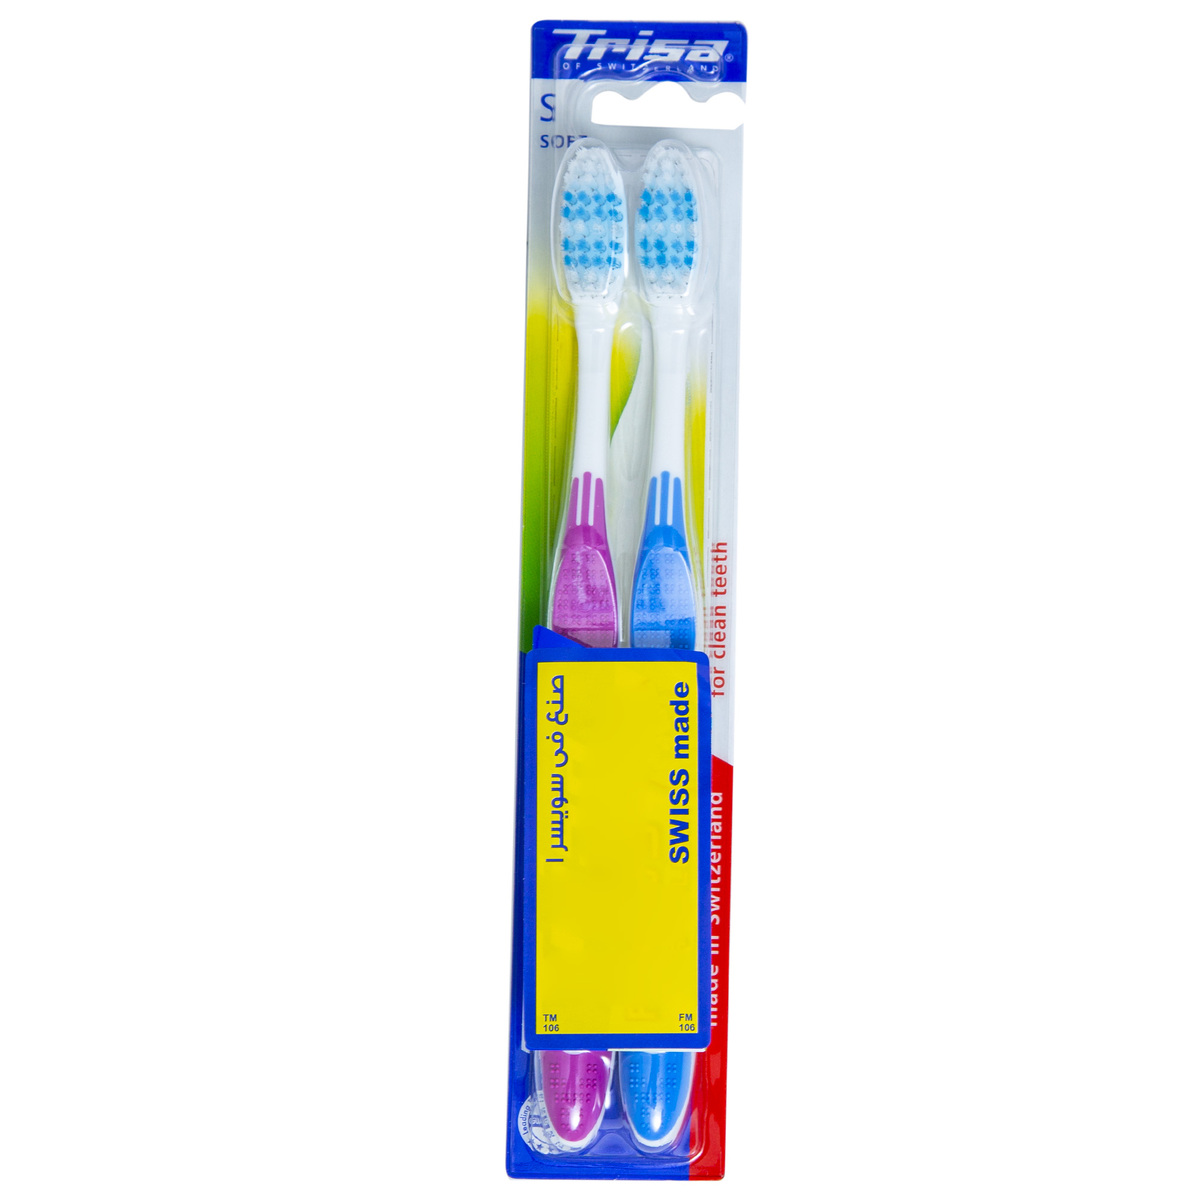 Trisa For Clean Soft Tooth Brush 2 pcs Assorted Colour